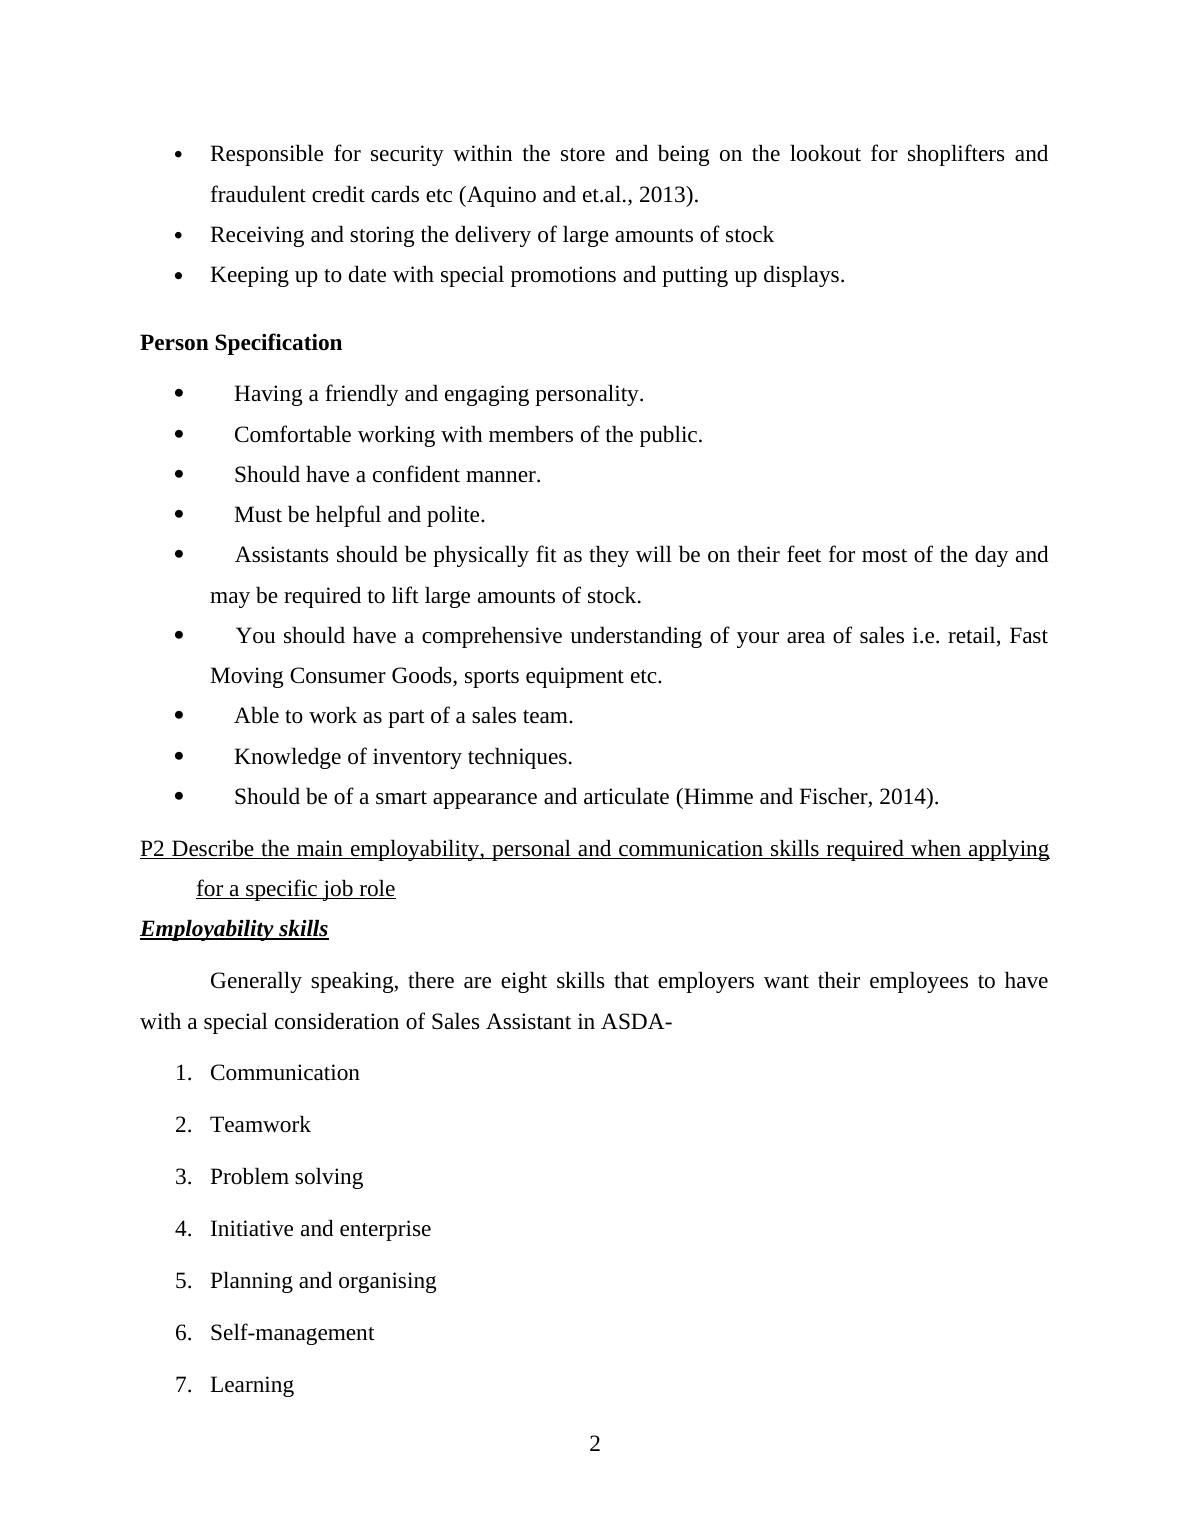 Business Resources of Asda : Assignment_4